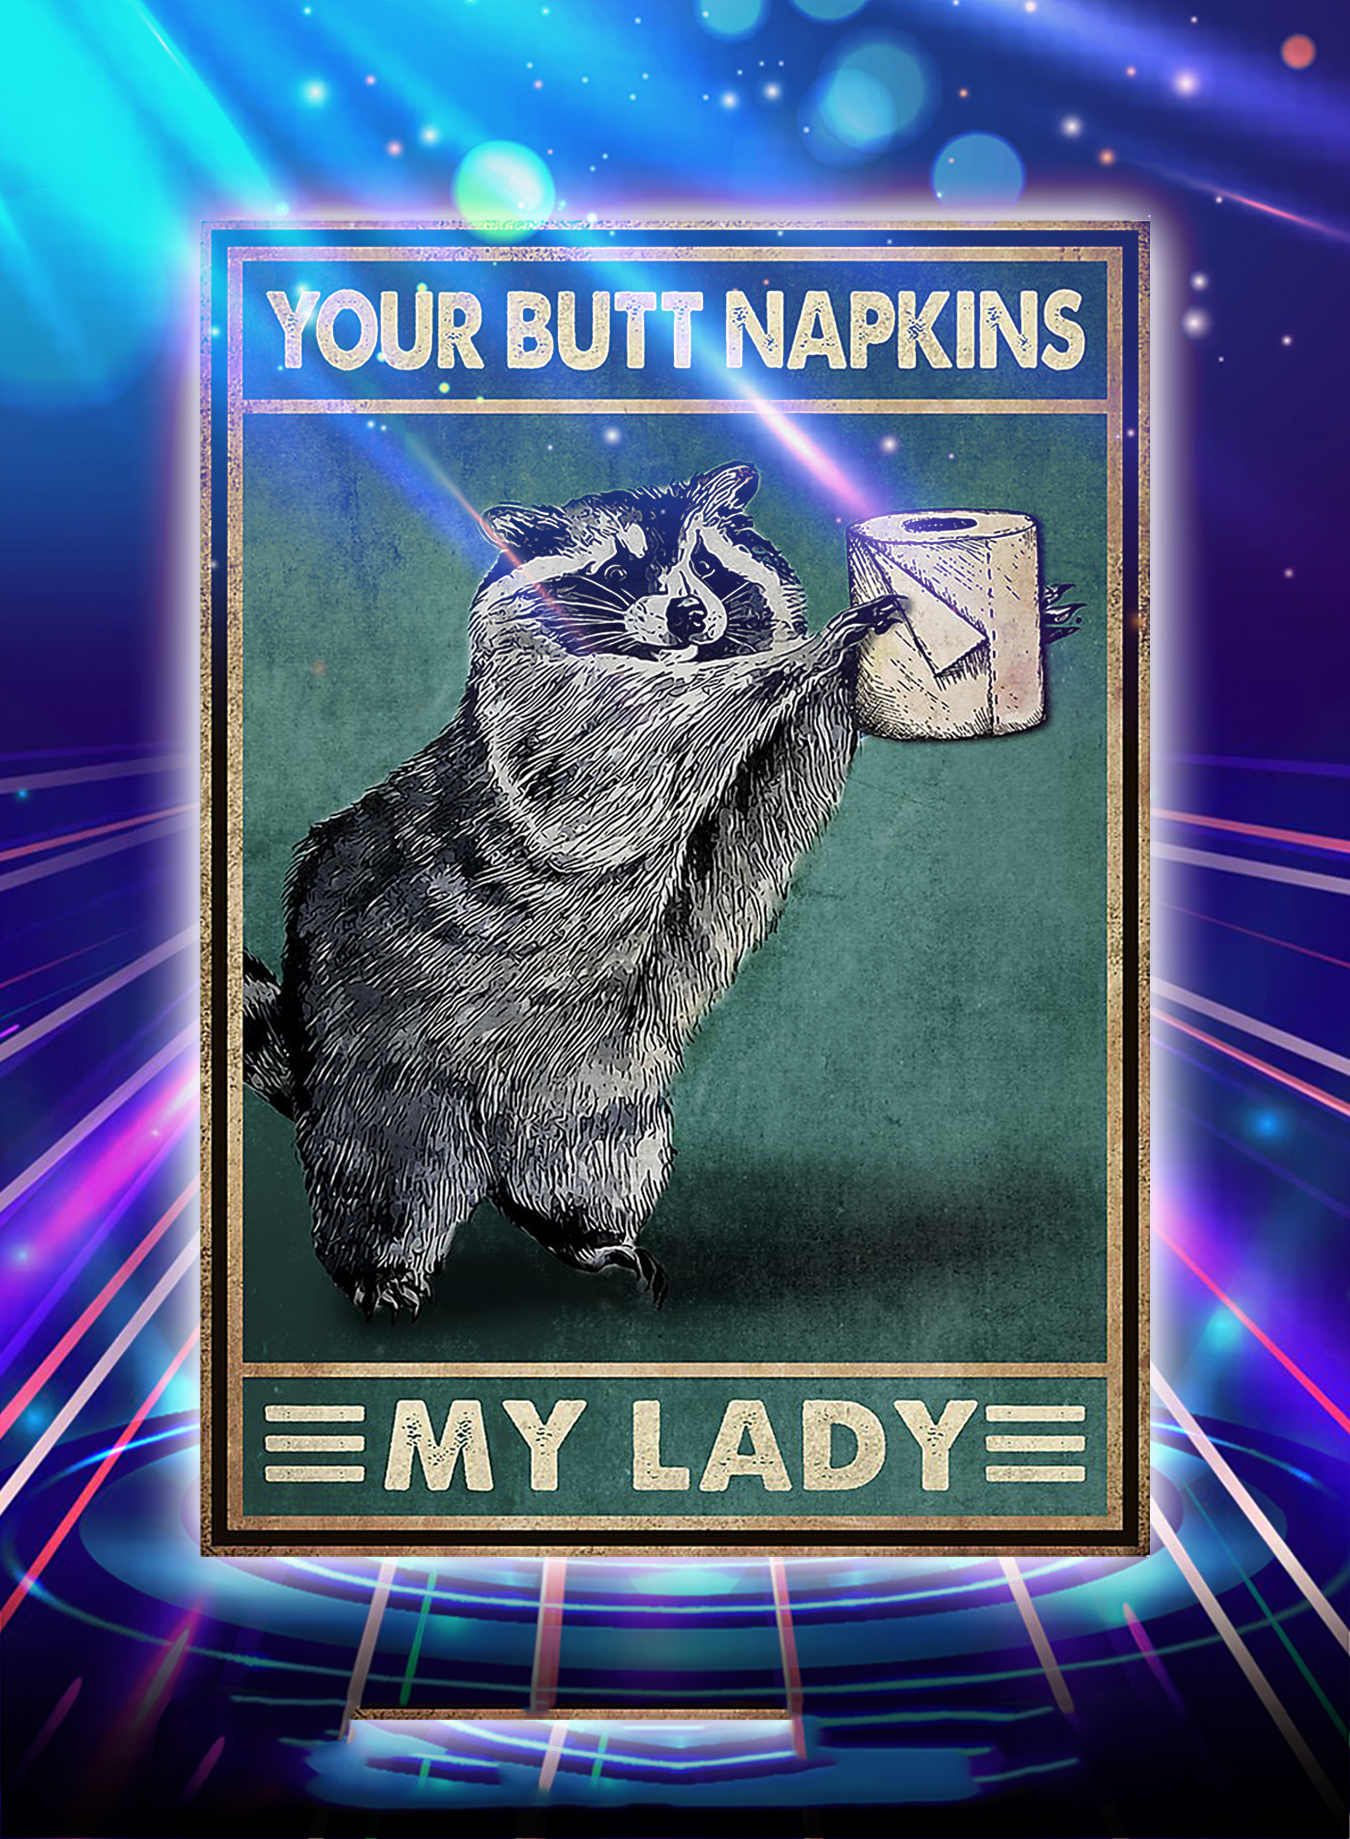 Racoon your butt napkins my lady poster - A2